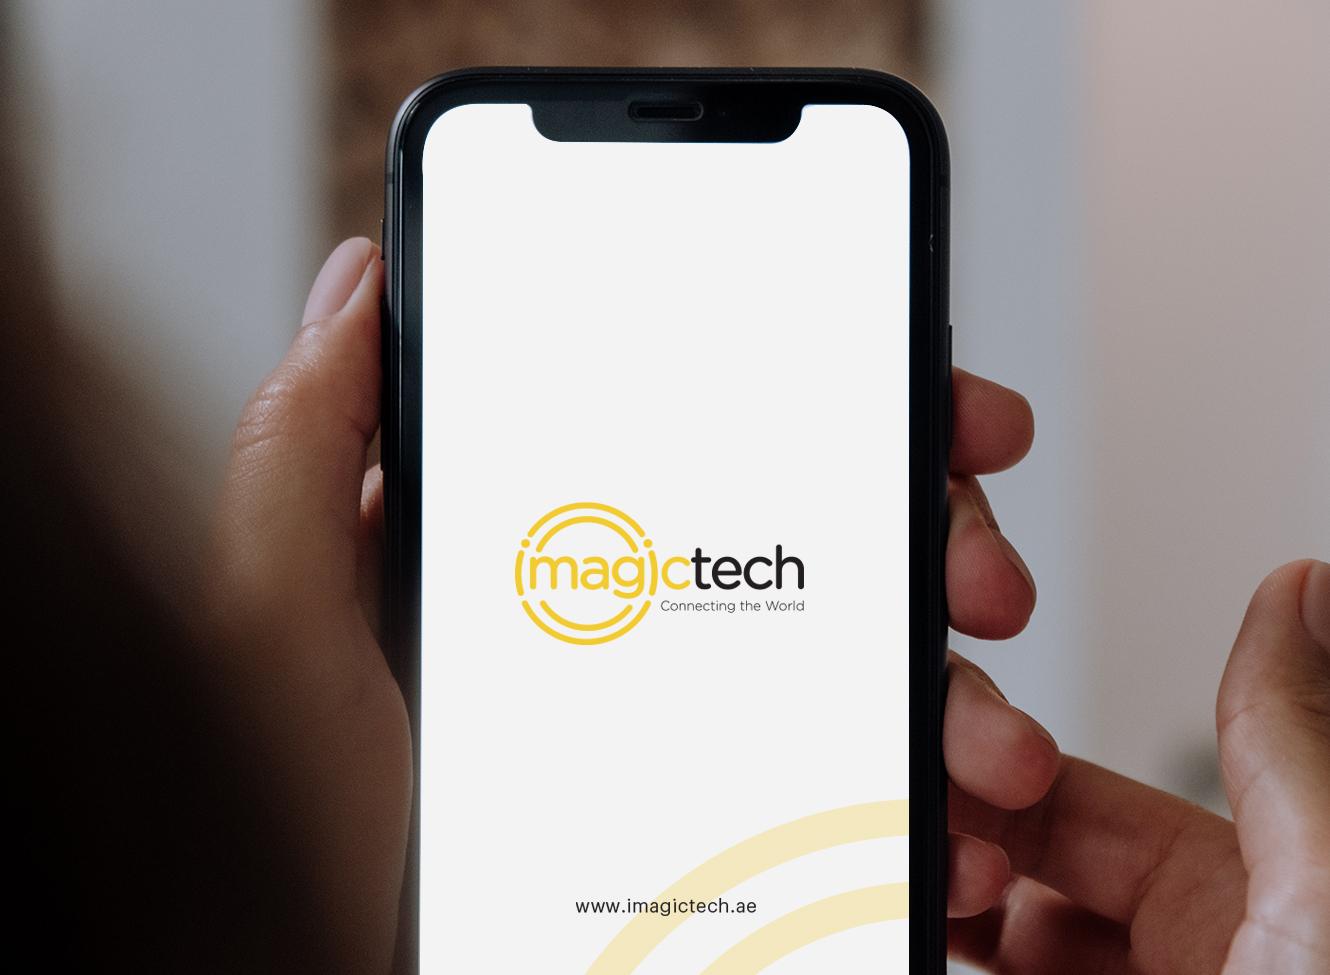 ImagicTech connecting the world